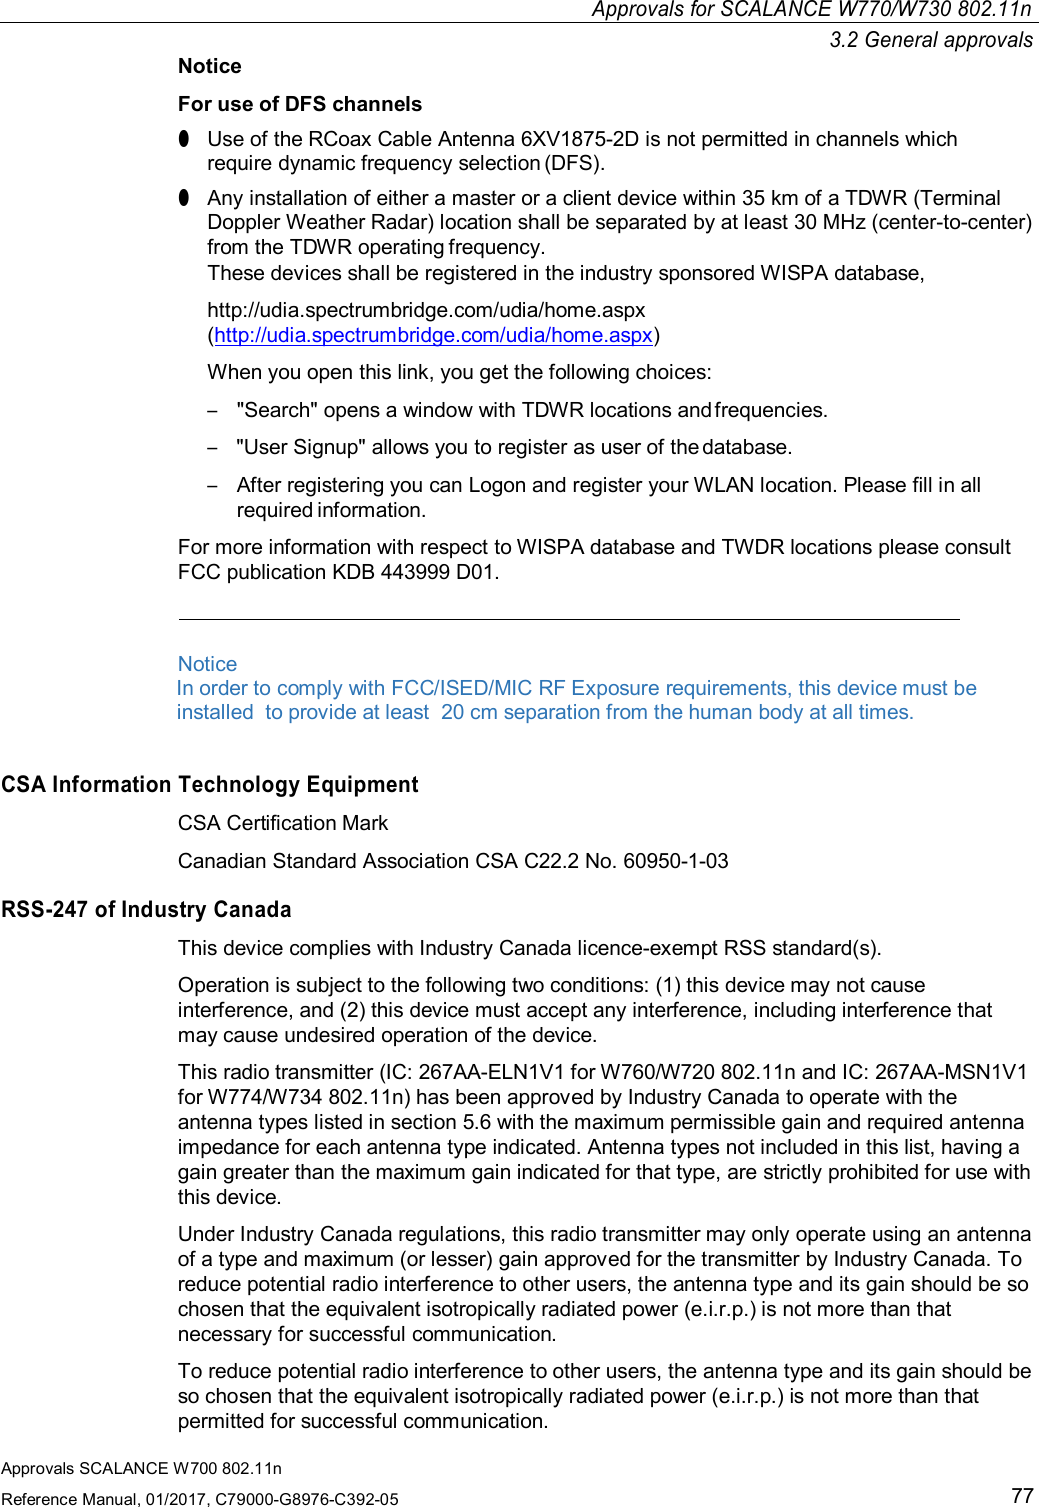 Approvals SCALANCE W700 802.11nReference Manual, 01/2017, C79000-G8976-C392-0577Approvals for SCALANCE W770/W730 802.11n3.2 General approvalsNoticeFor use of DFS channels●Use of the RCoax Cable Antenna 6XV1875-2D is not permitted in channels whichrequire dynamic frequency selection (DFS).●Any installation of either a master or a client device within 35 km of a TDWR (TerminalDoppler Weather Radar) location shall be separated by at least 30 MHz (center-to-center)from the TDWR operating frequency.These devices shall be registered in the industry sponsored WISPA database,http://udia.spectrumbridge.com/udia/home.aspx(http://udia.spectrumbridge.com/udia/home.aspx)When you open this link, you get the following choices:–&quot;Search&quot; opens a window with TDWR locations and frequencies.–&quot;User Signup&quot; allows you to register as user of the database.–After registering you can Logon and register your WLAN location. Please fill in allrequired information.For more information with respect to WISPA database and TWDR locations please consultFCC publication KDB 443999 D01.Notice                    In order to comply with FCC/ISED/MIC RF Exposure requirements, this device must beinstalled  to provide at least  20 cm separation from the human body at all times.CSA Information Technology EquipmentCSA Certification MarkCanadian Standard Association CSA C22.2 No. 60950-1-03RSS-247 of Industry CanadaThis device complies with Industry Canada licence-exempt RSS standard(s).Operation is subject to the following two conditions: (1) this device may not causeinterference, and (2) this device must accept any interference, including interference thatmay cause undesired operation of the device.This radio transmitter (IC: 267AA-ELN1V1 for W760/W720 802.11n and IC: 267AA-MSN1V1for W774/W734 802.11n) has been approved by Industry Canada to operate with theantenna types listed in section 5.6 with the maximum permissible gain and required antennaimpedance for each antenna type indicated. Antenna types not included in this list, having again greater than the maximum gain indicated for that type, are strictly prohibited for use withthis device.Under Industry Canada regulations, this radio transmitter may only operate using an antennaof a type and maximum (or lesser) gain approved for the transmitter by Industry Canada. Toreduce potential radio interference to other users, the antenna type and its gain should be sochosen that the equivalent isotropically radiated power (e.i.r.p.) is not more than thatnecessary for successful communication.To reduce potential radio interference to other users, the antenna type and its gain should beso chosen that the equivalent isotropically radiated power (e.i.r.p.) is not more than thatpermitted for successful communication.